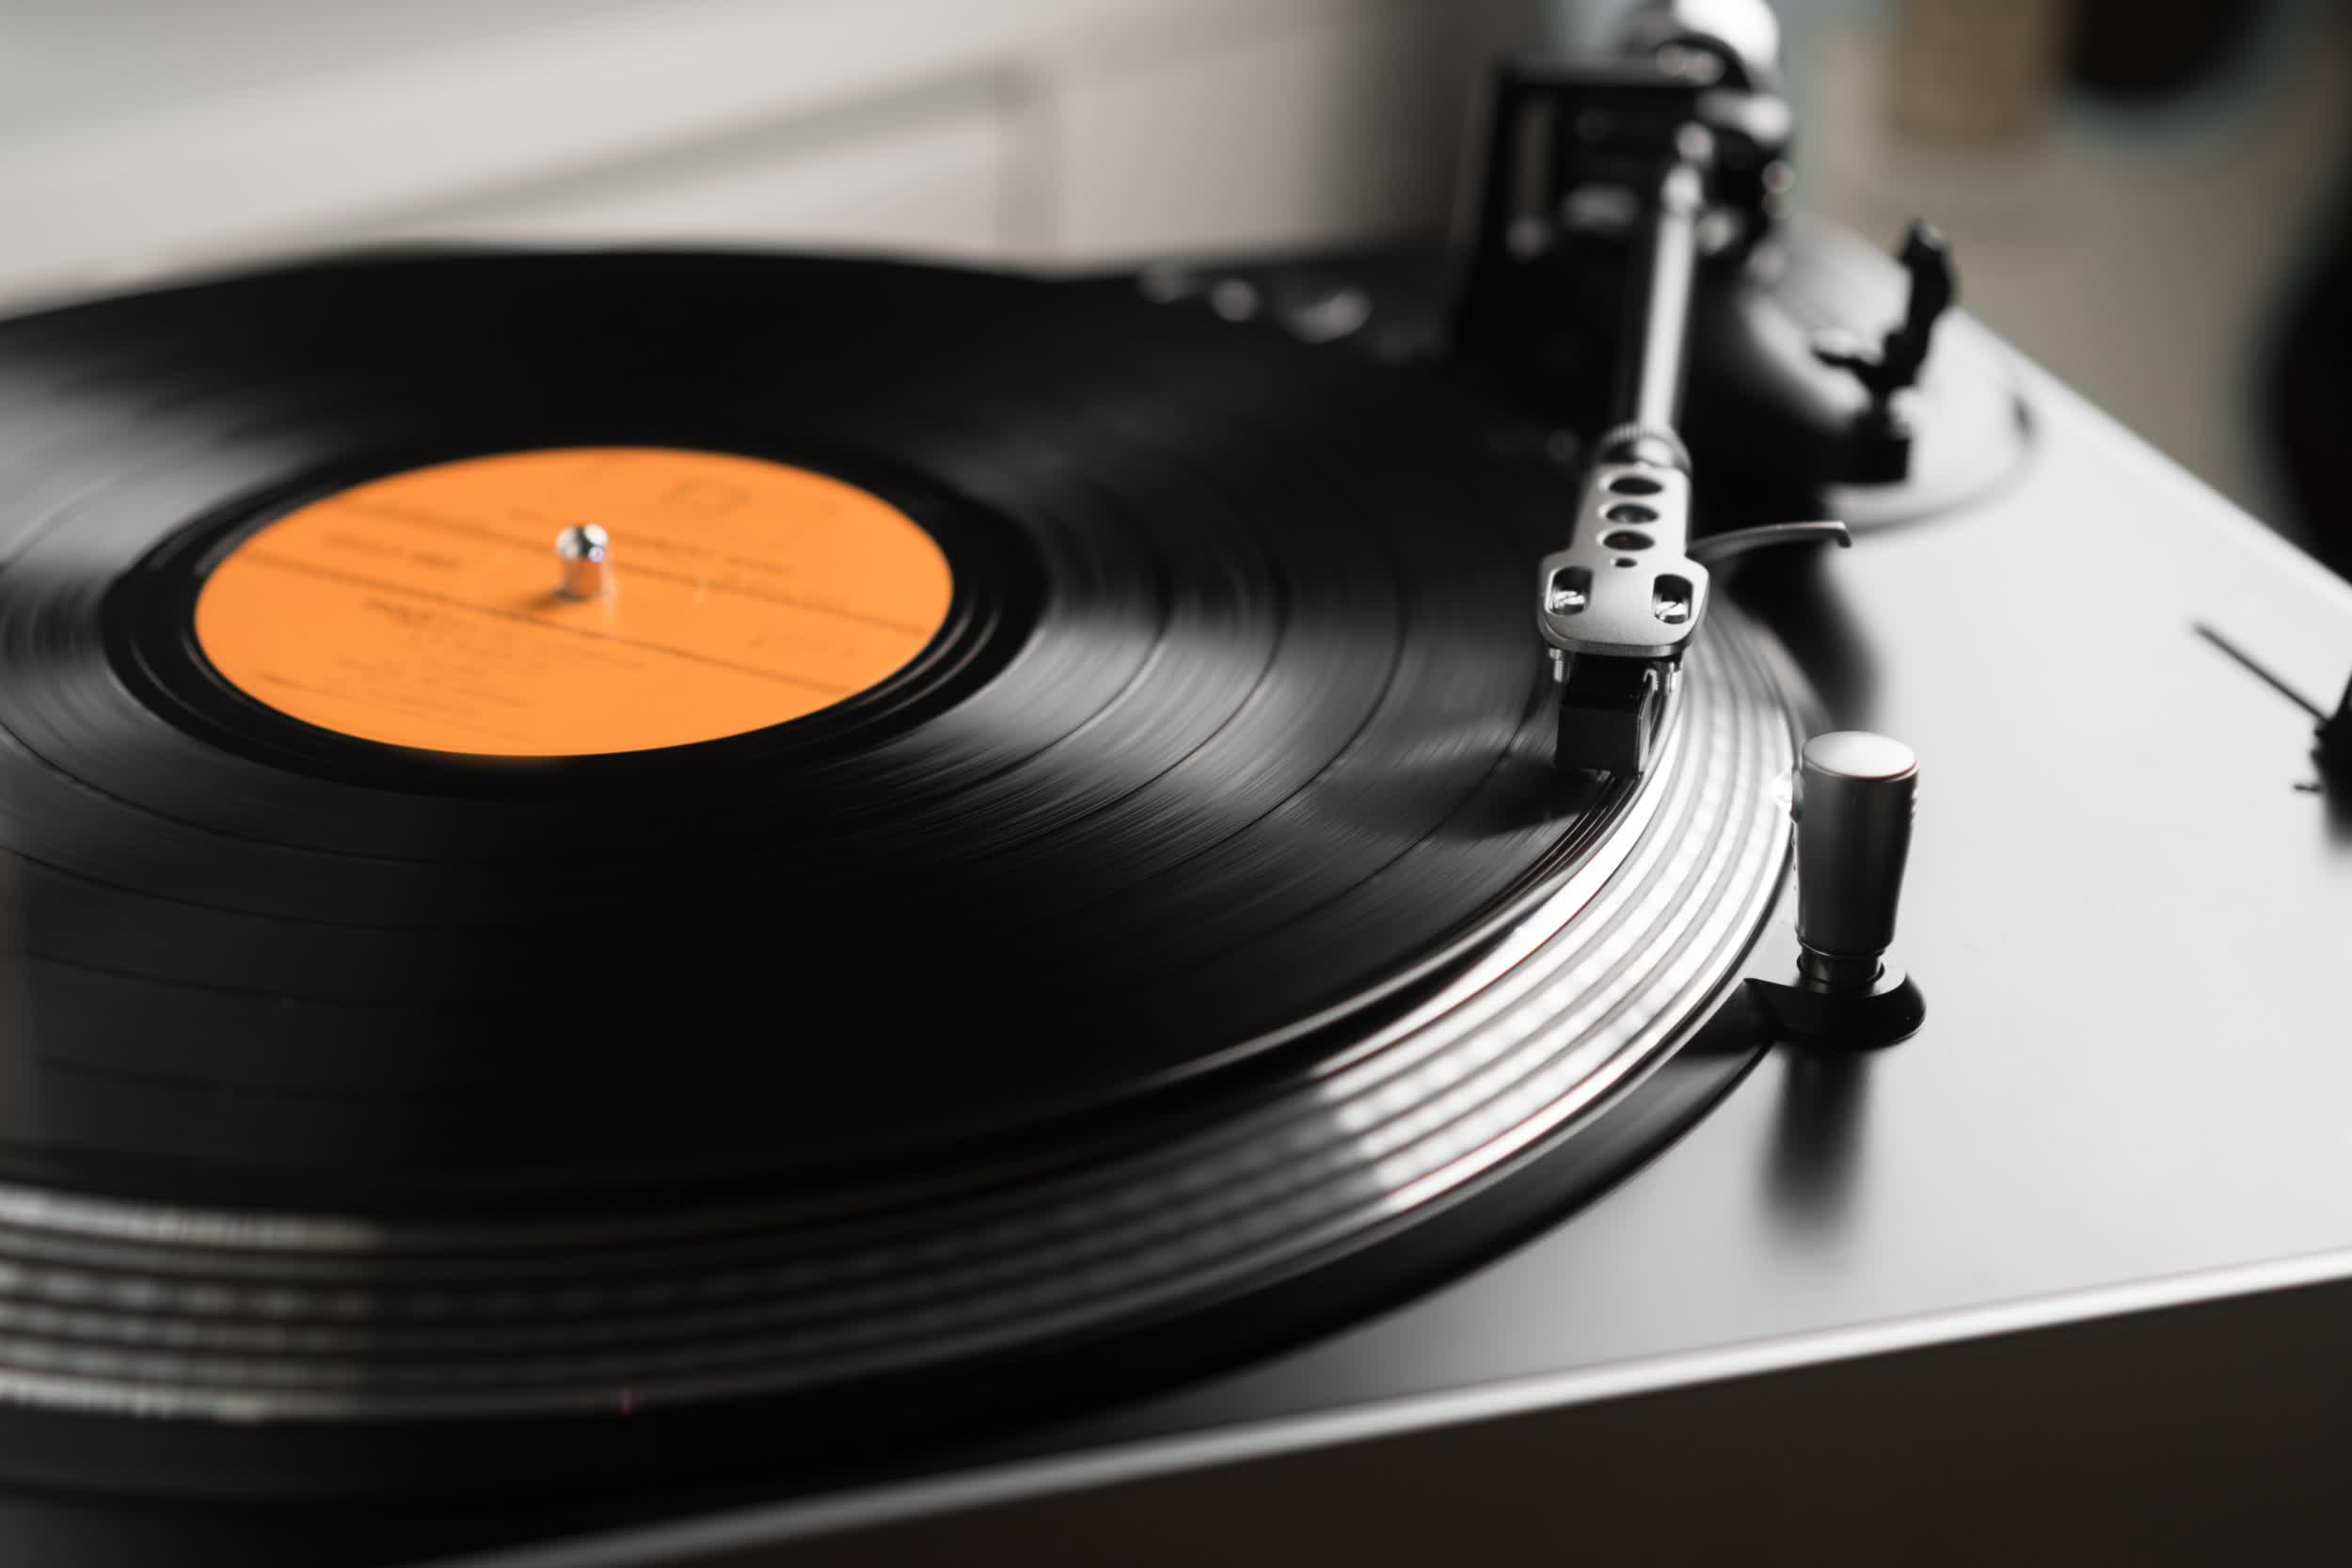 Vinyl records topped CD sales in 1H 2020 for the first time since the 80s